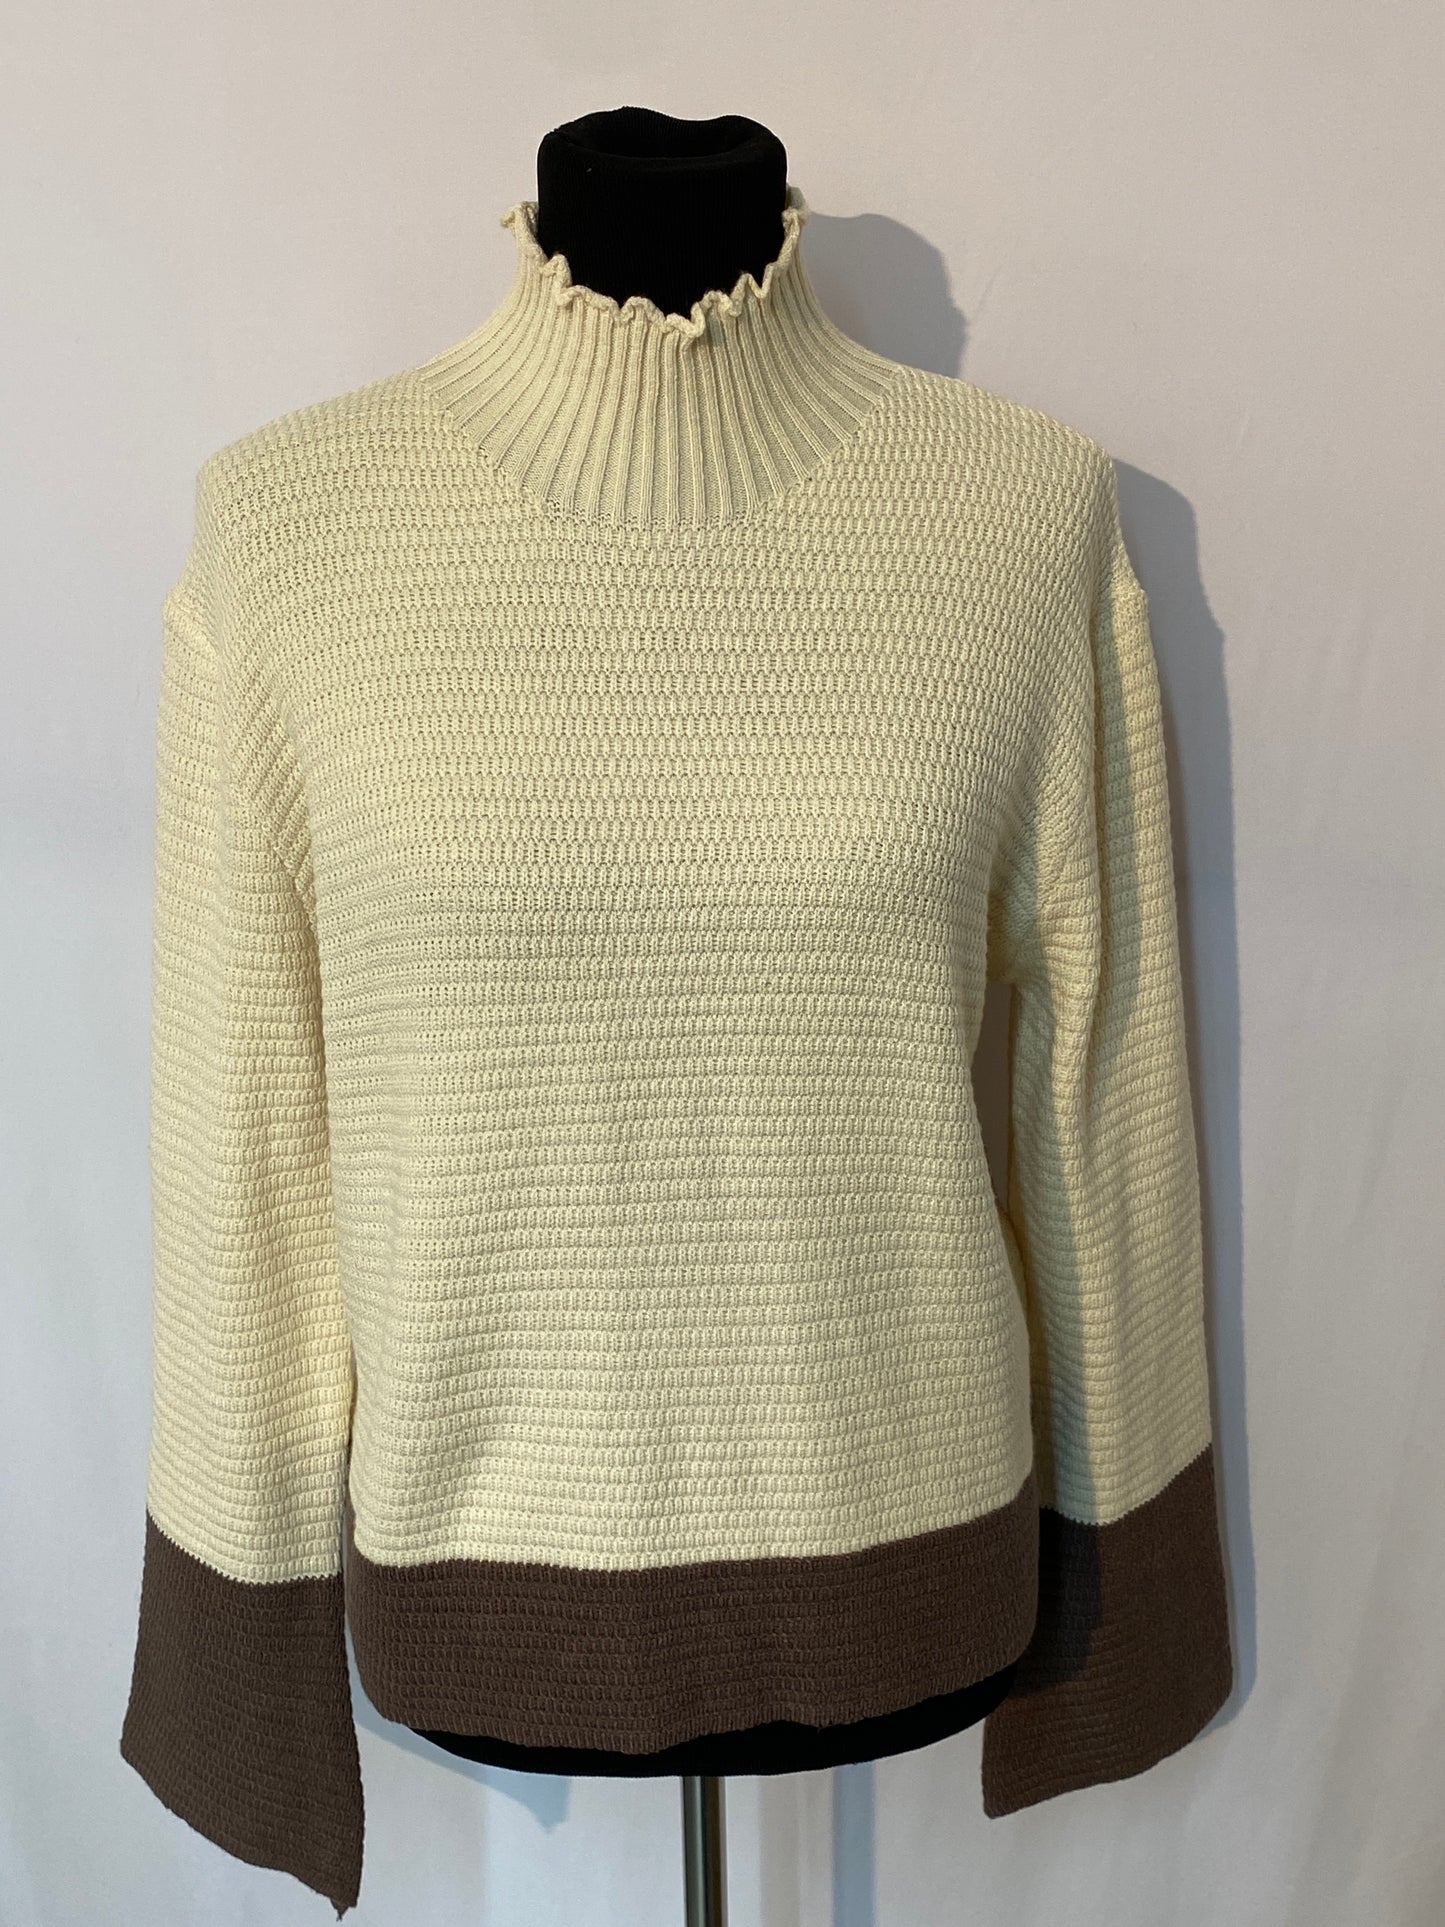 Two-Toned Turtleneck Sweater